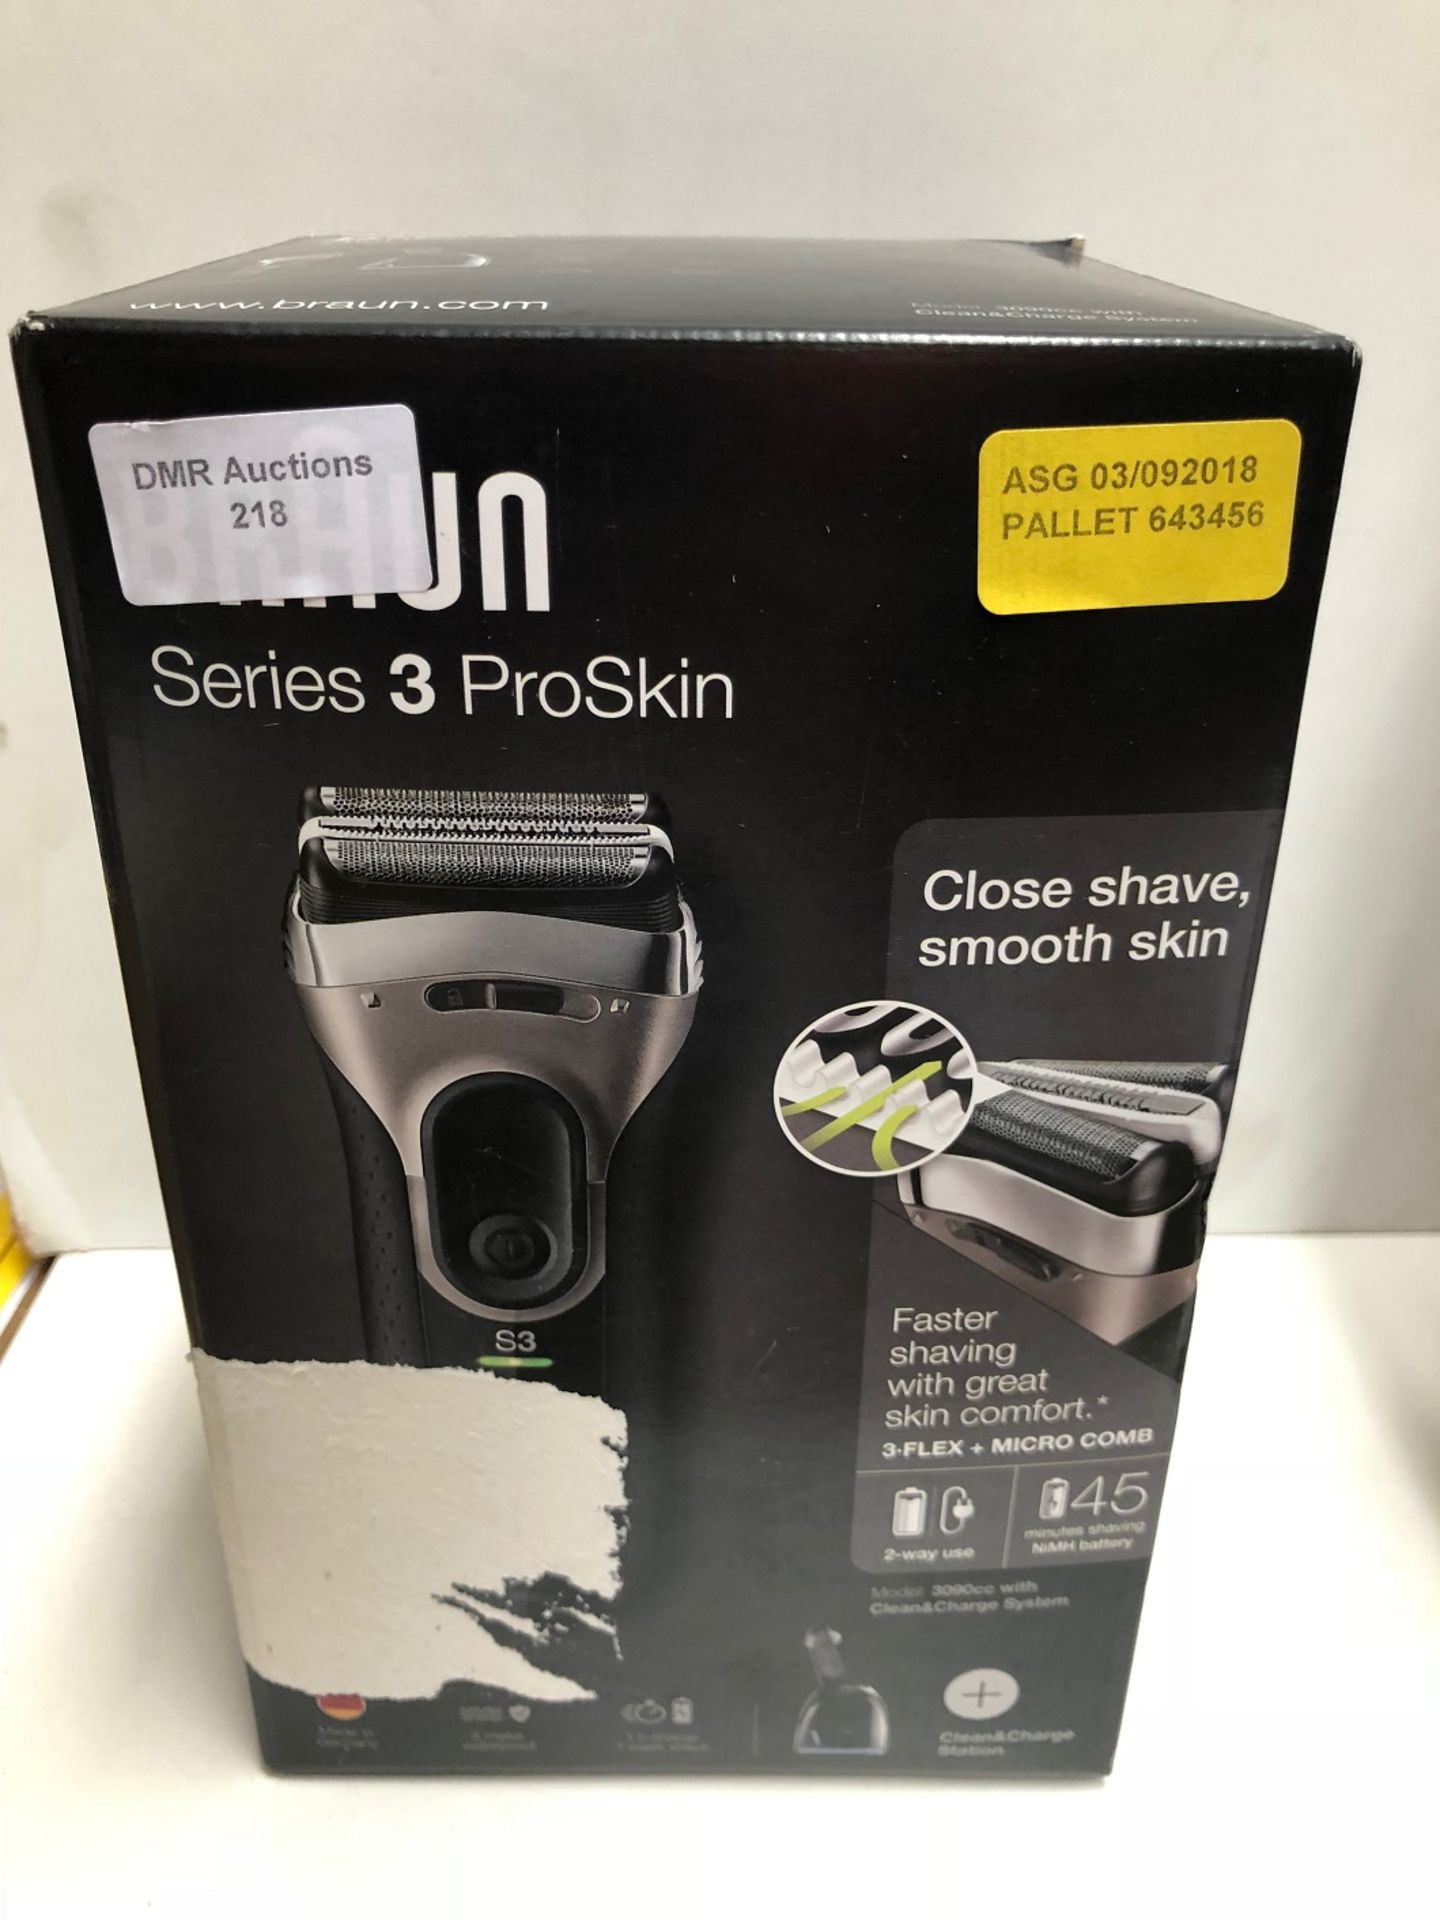 1 / RRP £40.00 BRAUN SERIES 3 PRO SKIN SHAVER / ASG 03.09.18 PALLET 643456 (VIEWING HIGHLY